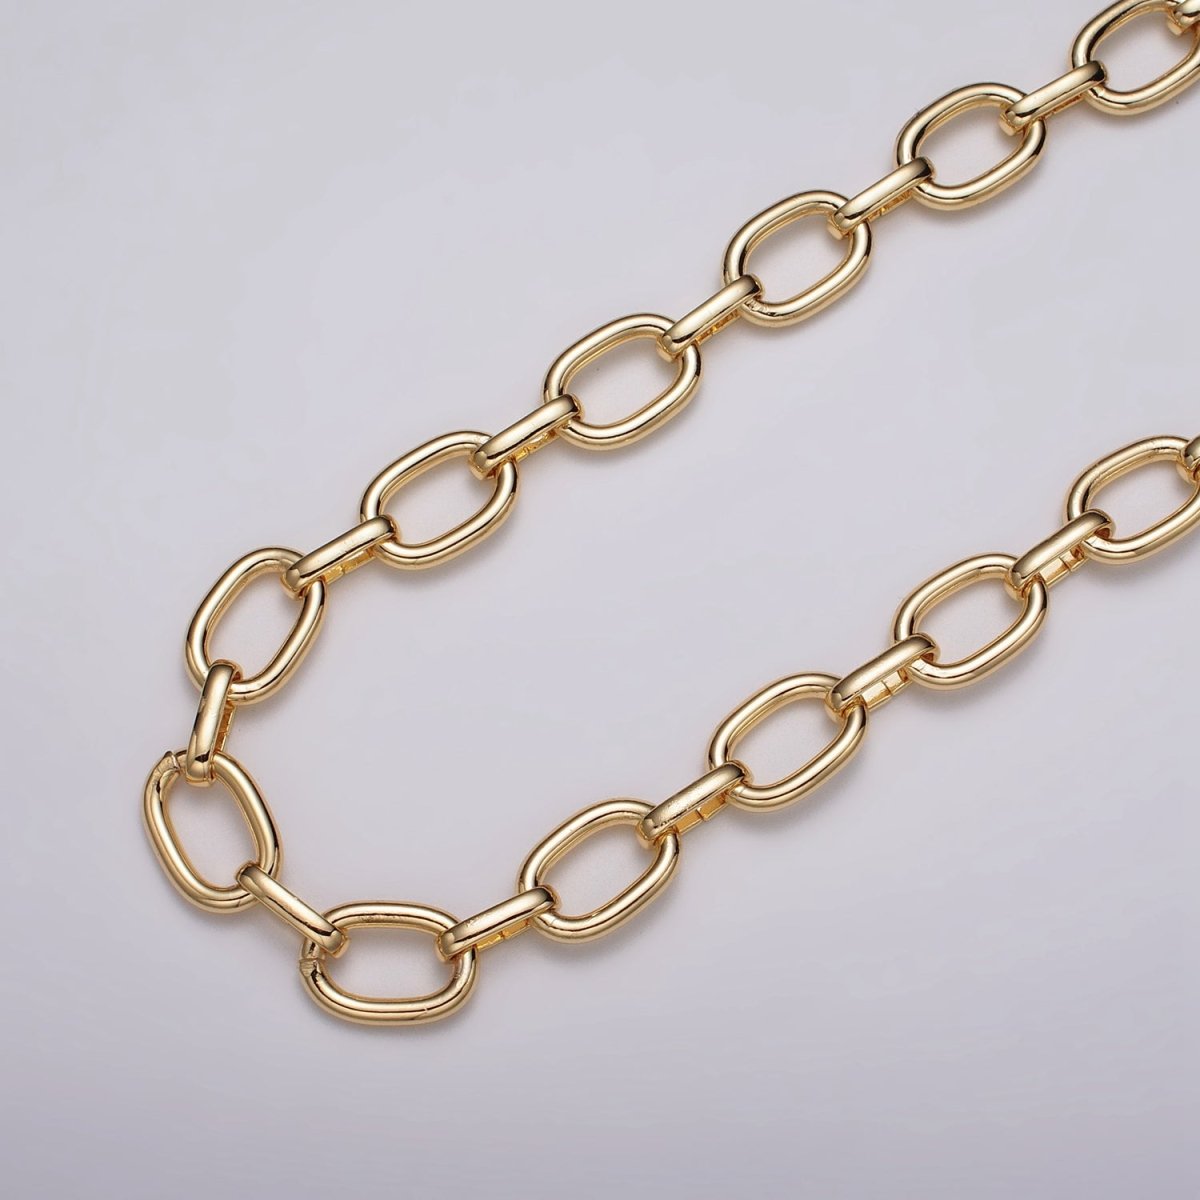 16k Gold Filled Cable Chain Link Unfinished Chain by Yard for Statement Layer Necklace Chain Streetwear Essentials | ROLL-1207 Clearance Pricing - DLUXCA